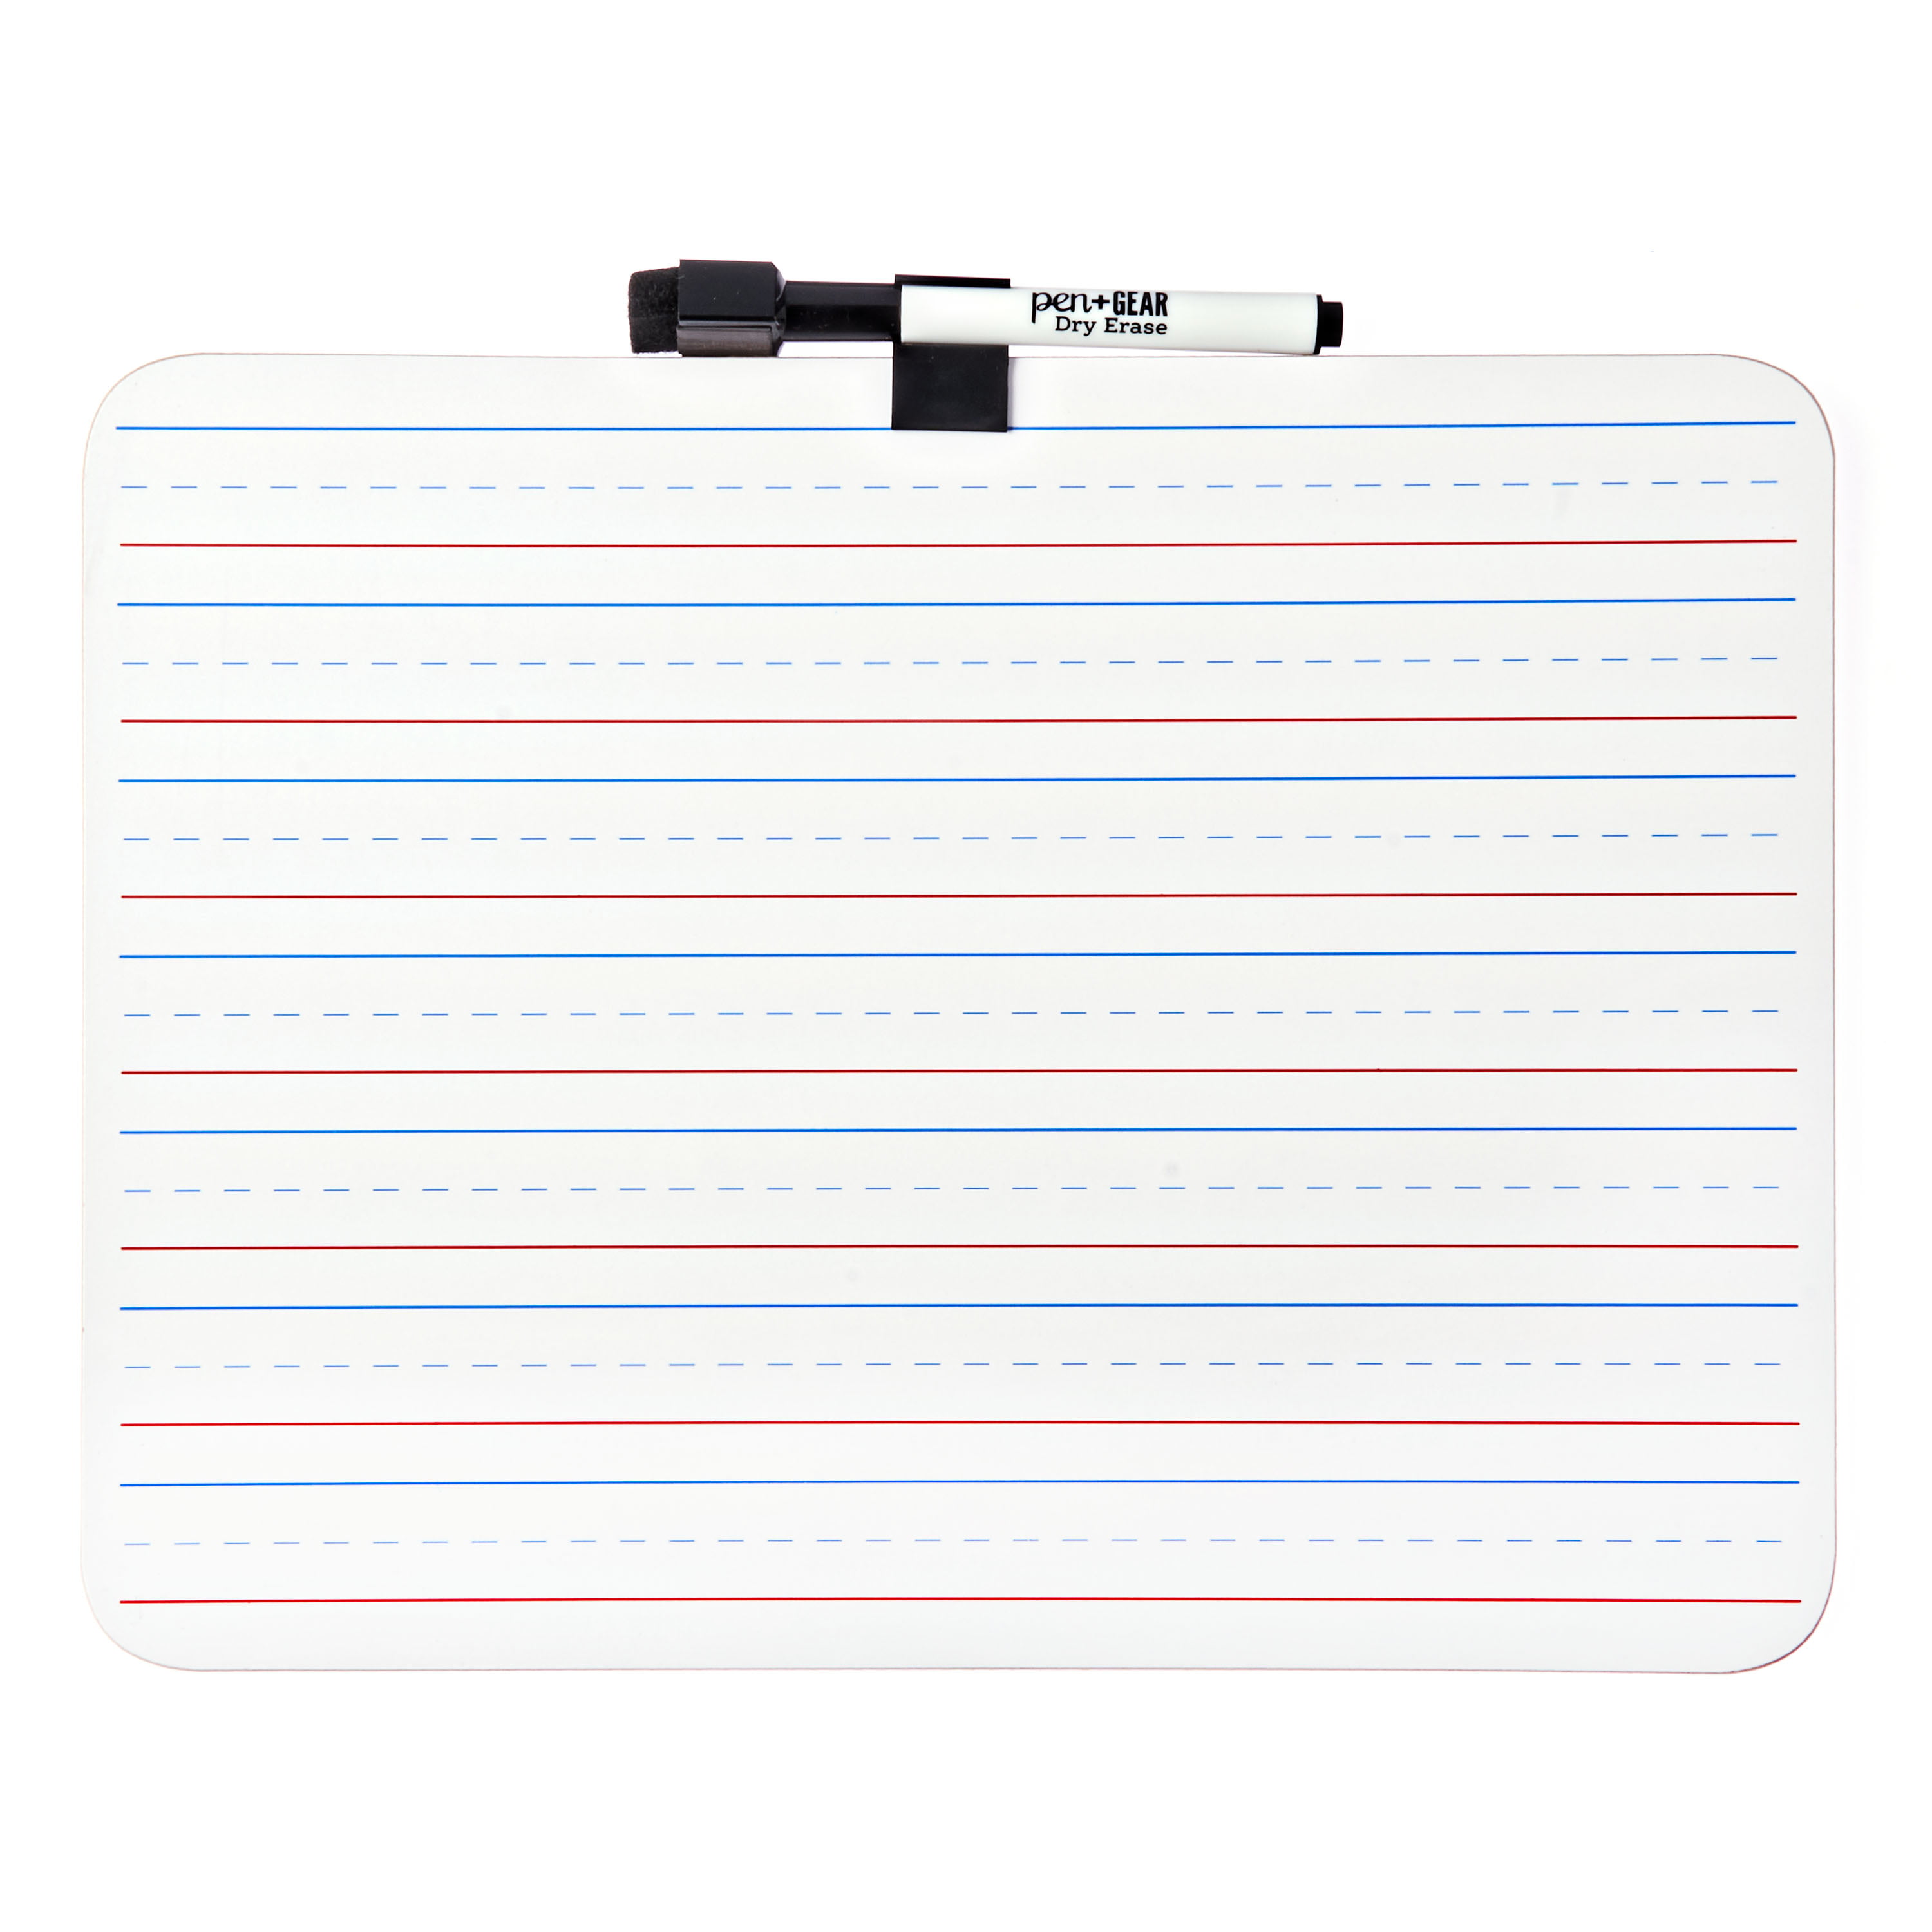 Dry-Erase Double Sided Lap Boards Mini White Boards Learning Drawimg Whiteboards 